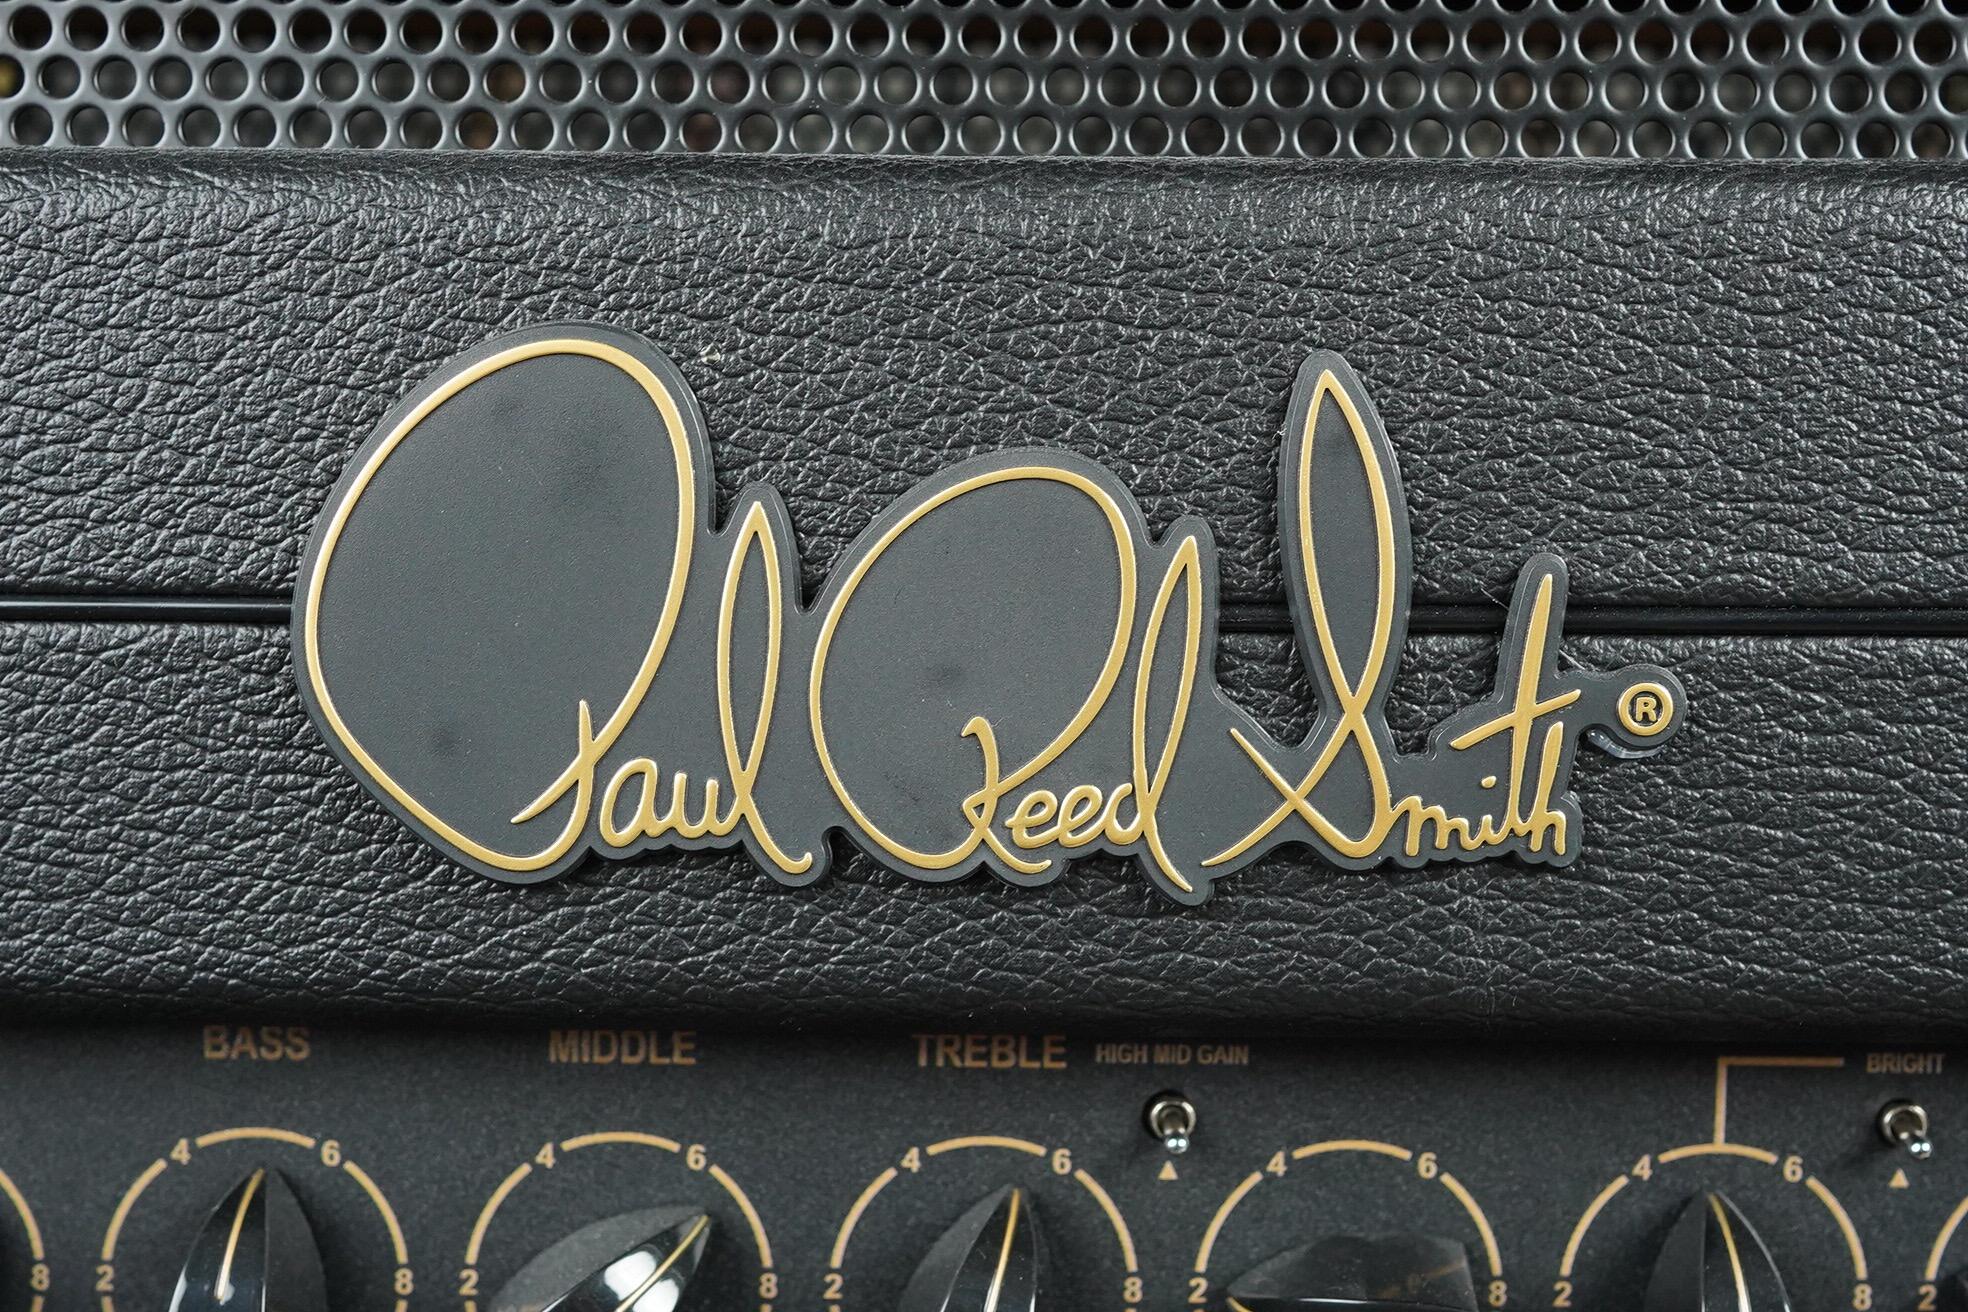 2022 Paul Reed Smith HDRX20